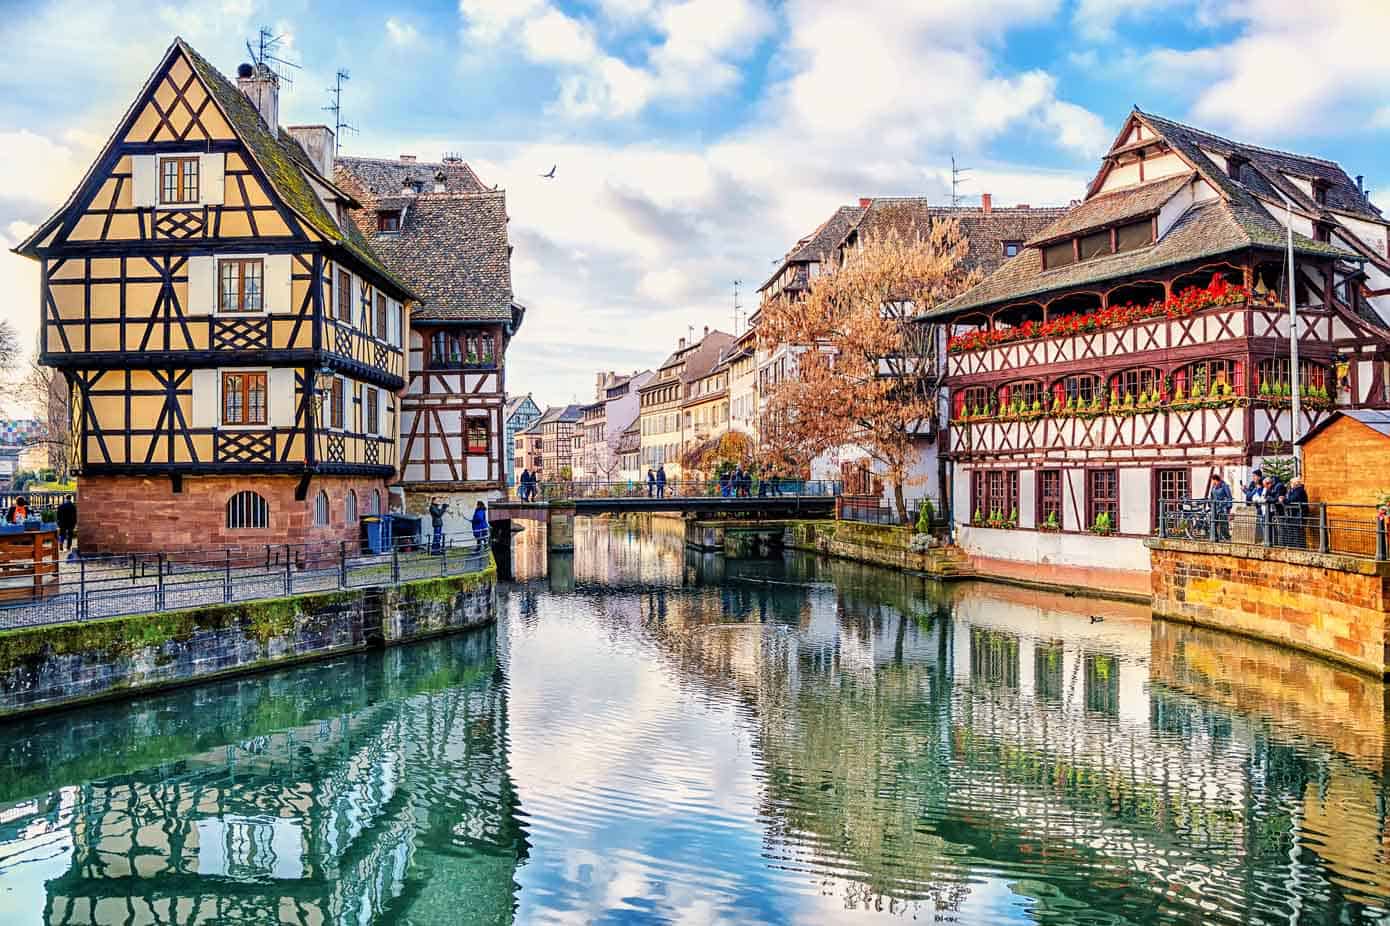 Half-timbered houses next to a canal in Strasbourg, France, a UNESCO World Heritage Site.